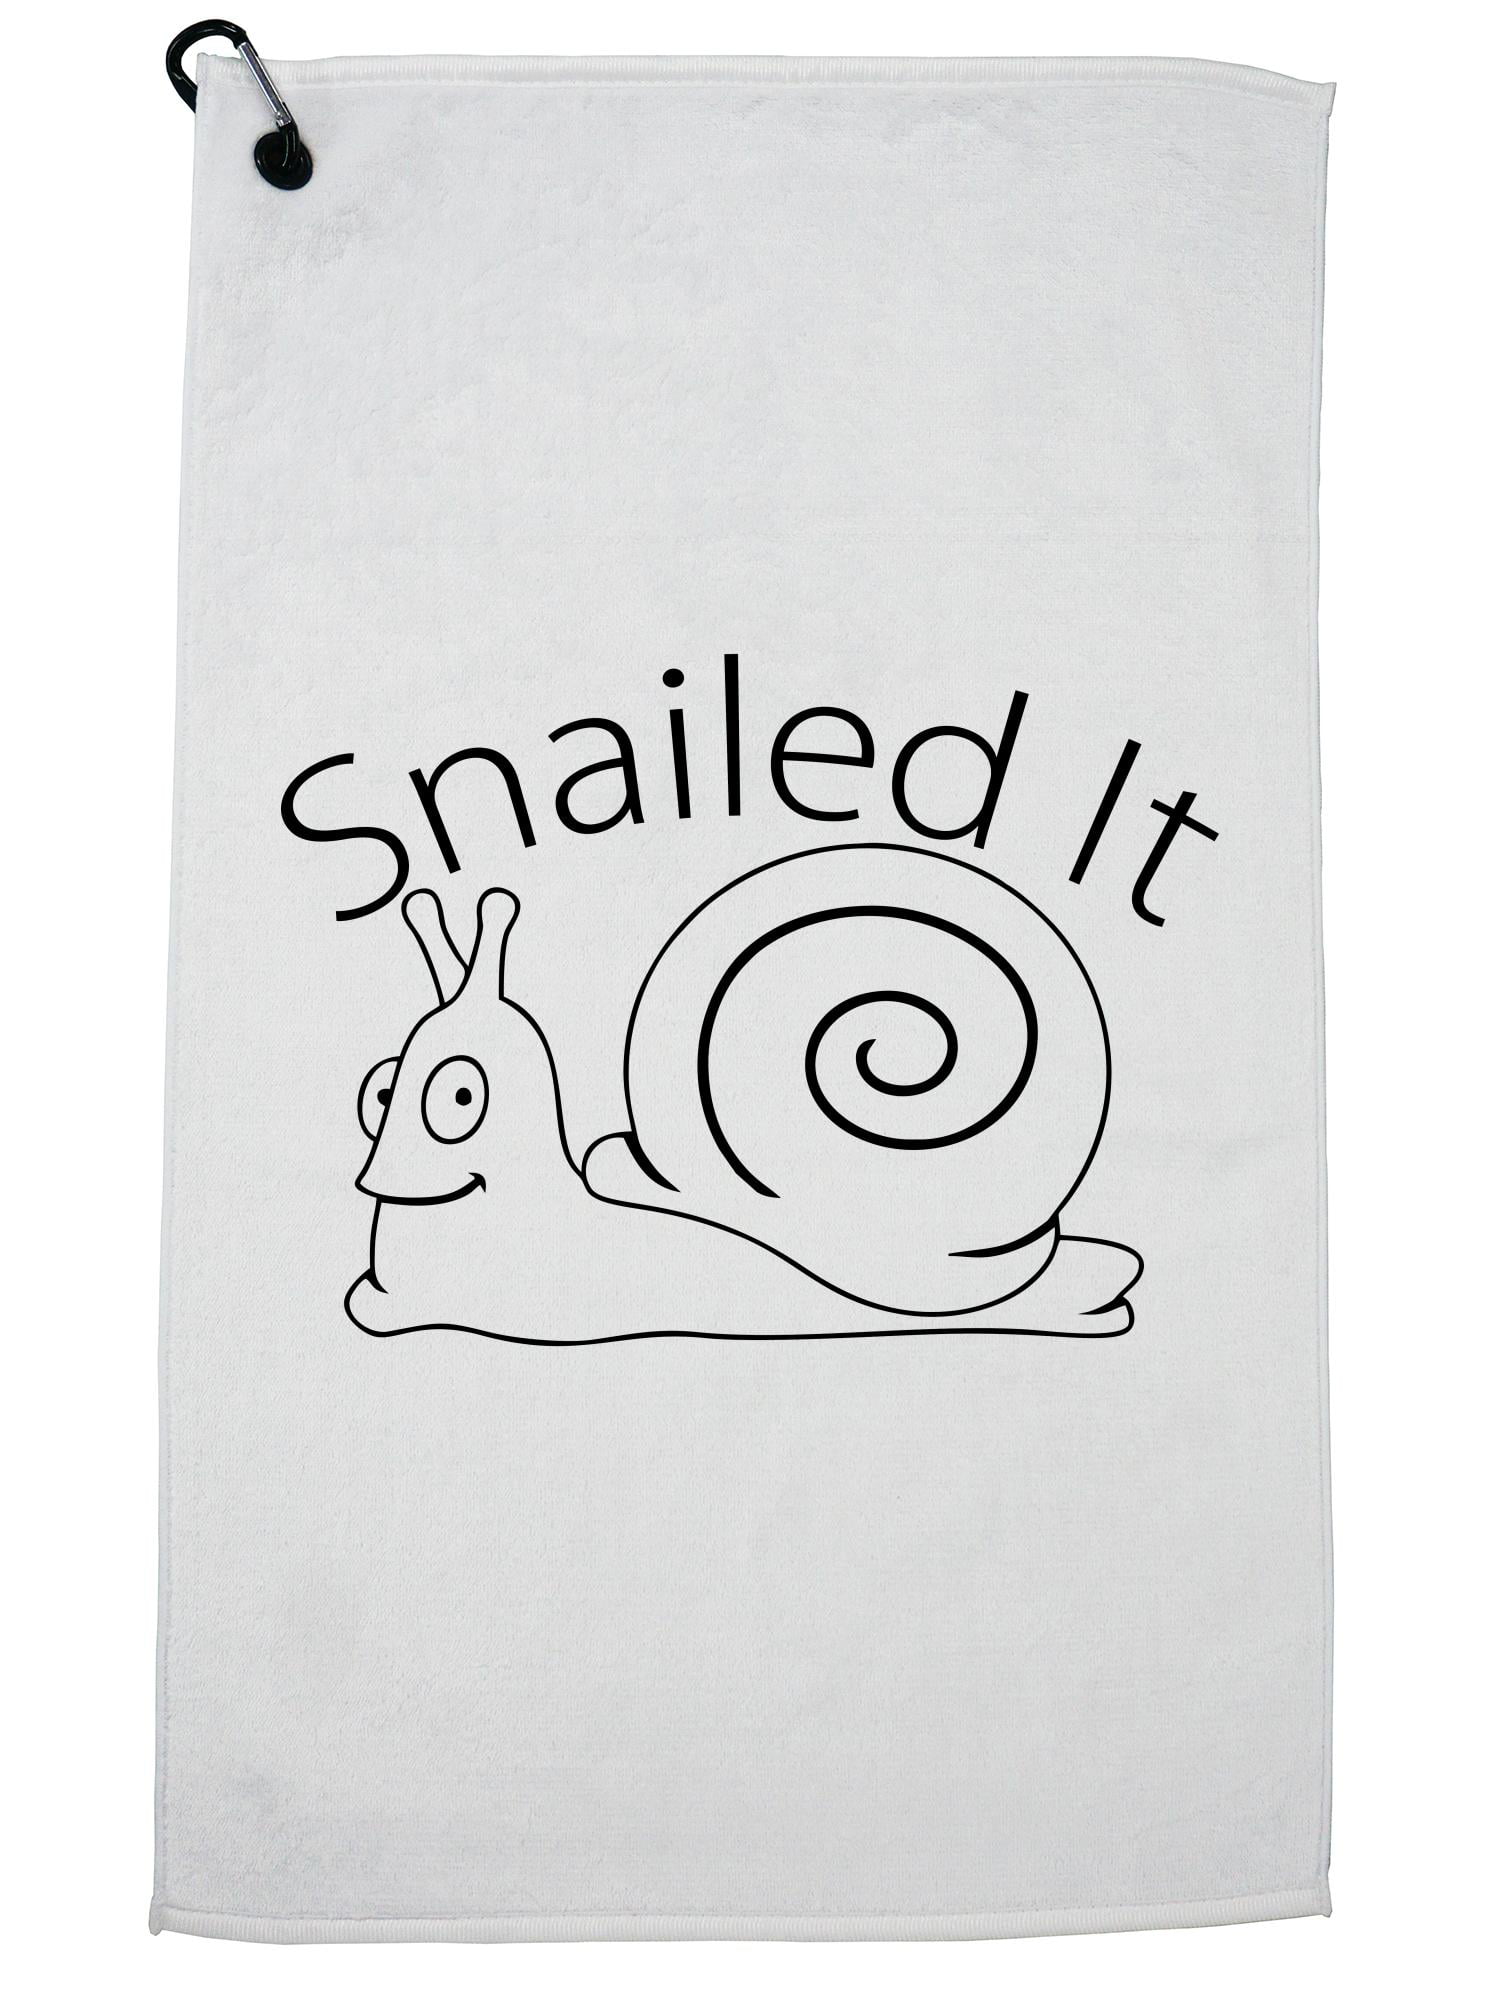 Snailed It Snail Nailed It Funny Awesome Golf Towel With